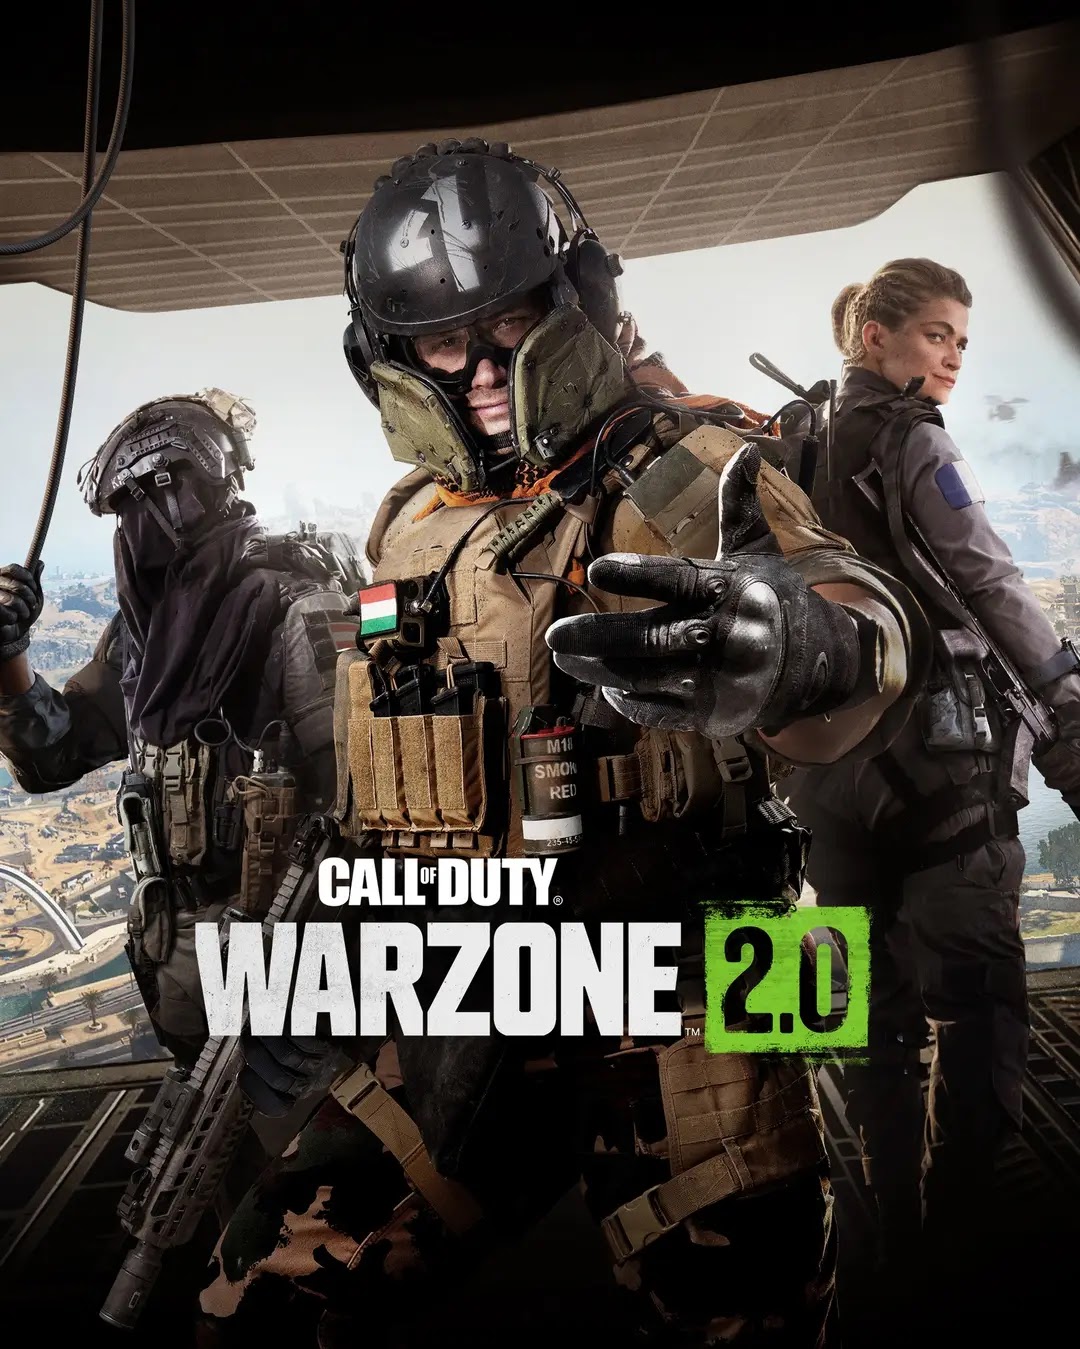 Call of Duty Warzone 2.0 release date officially revealed